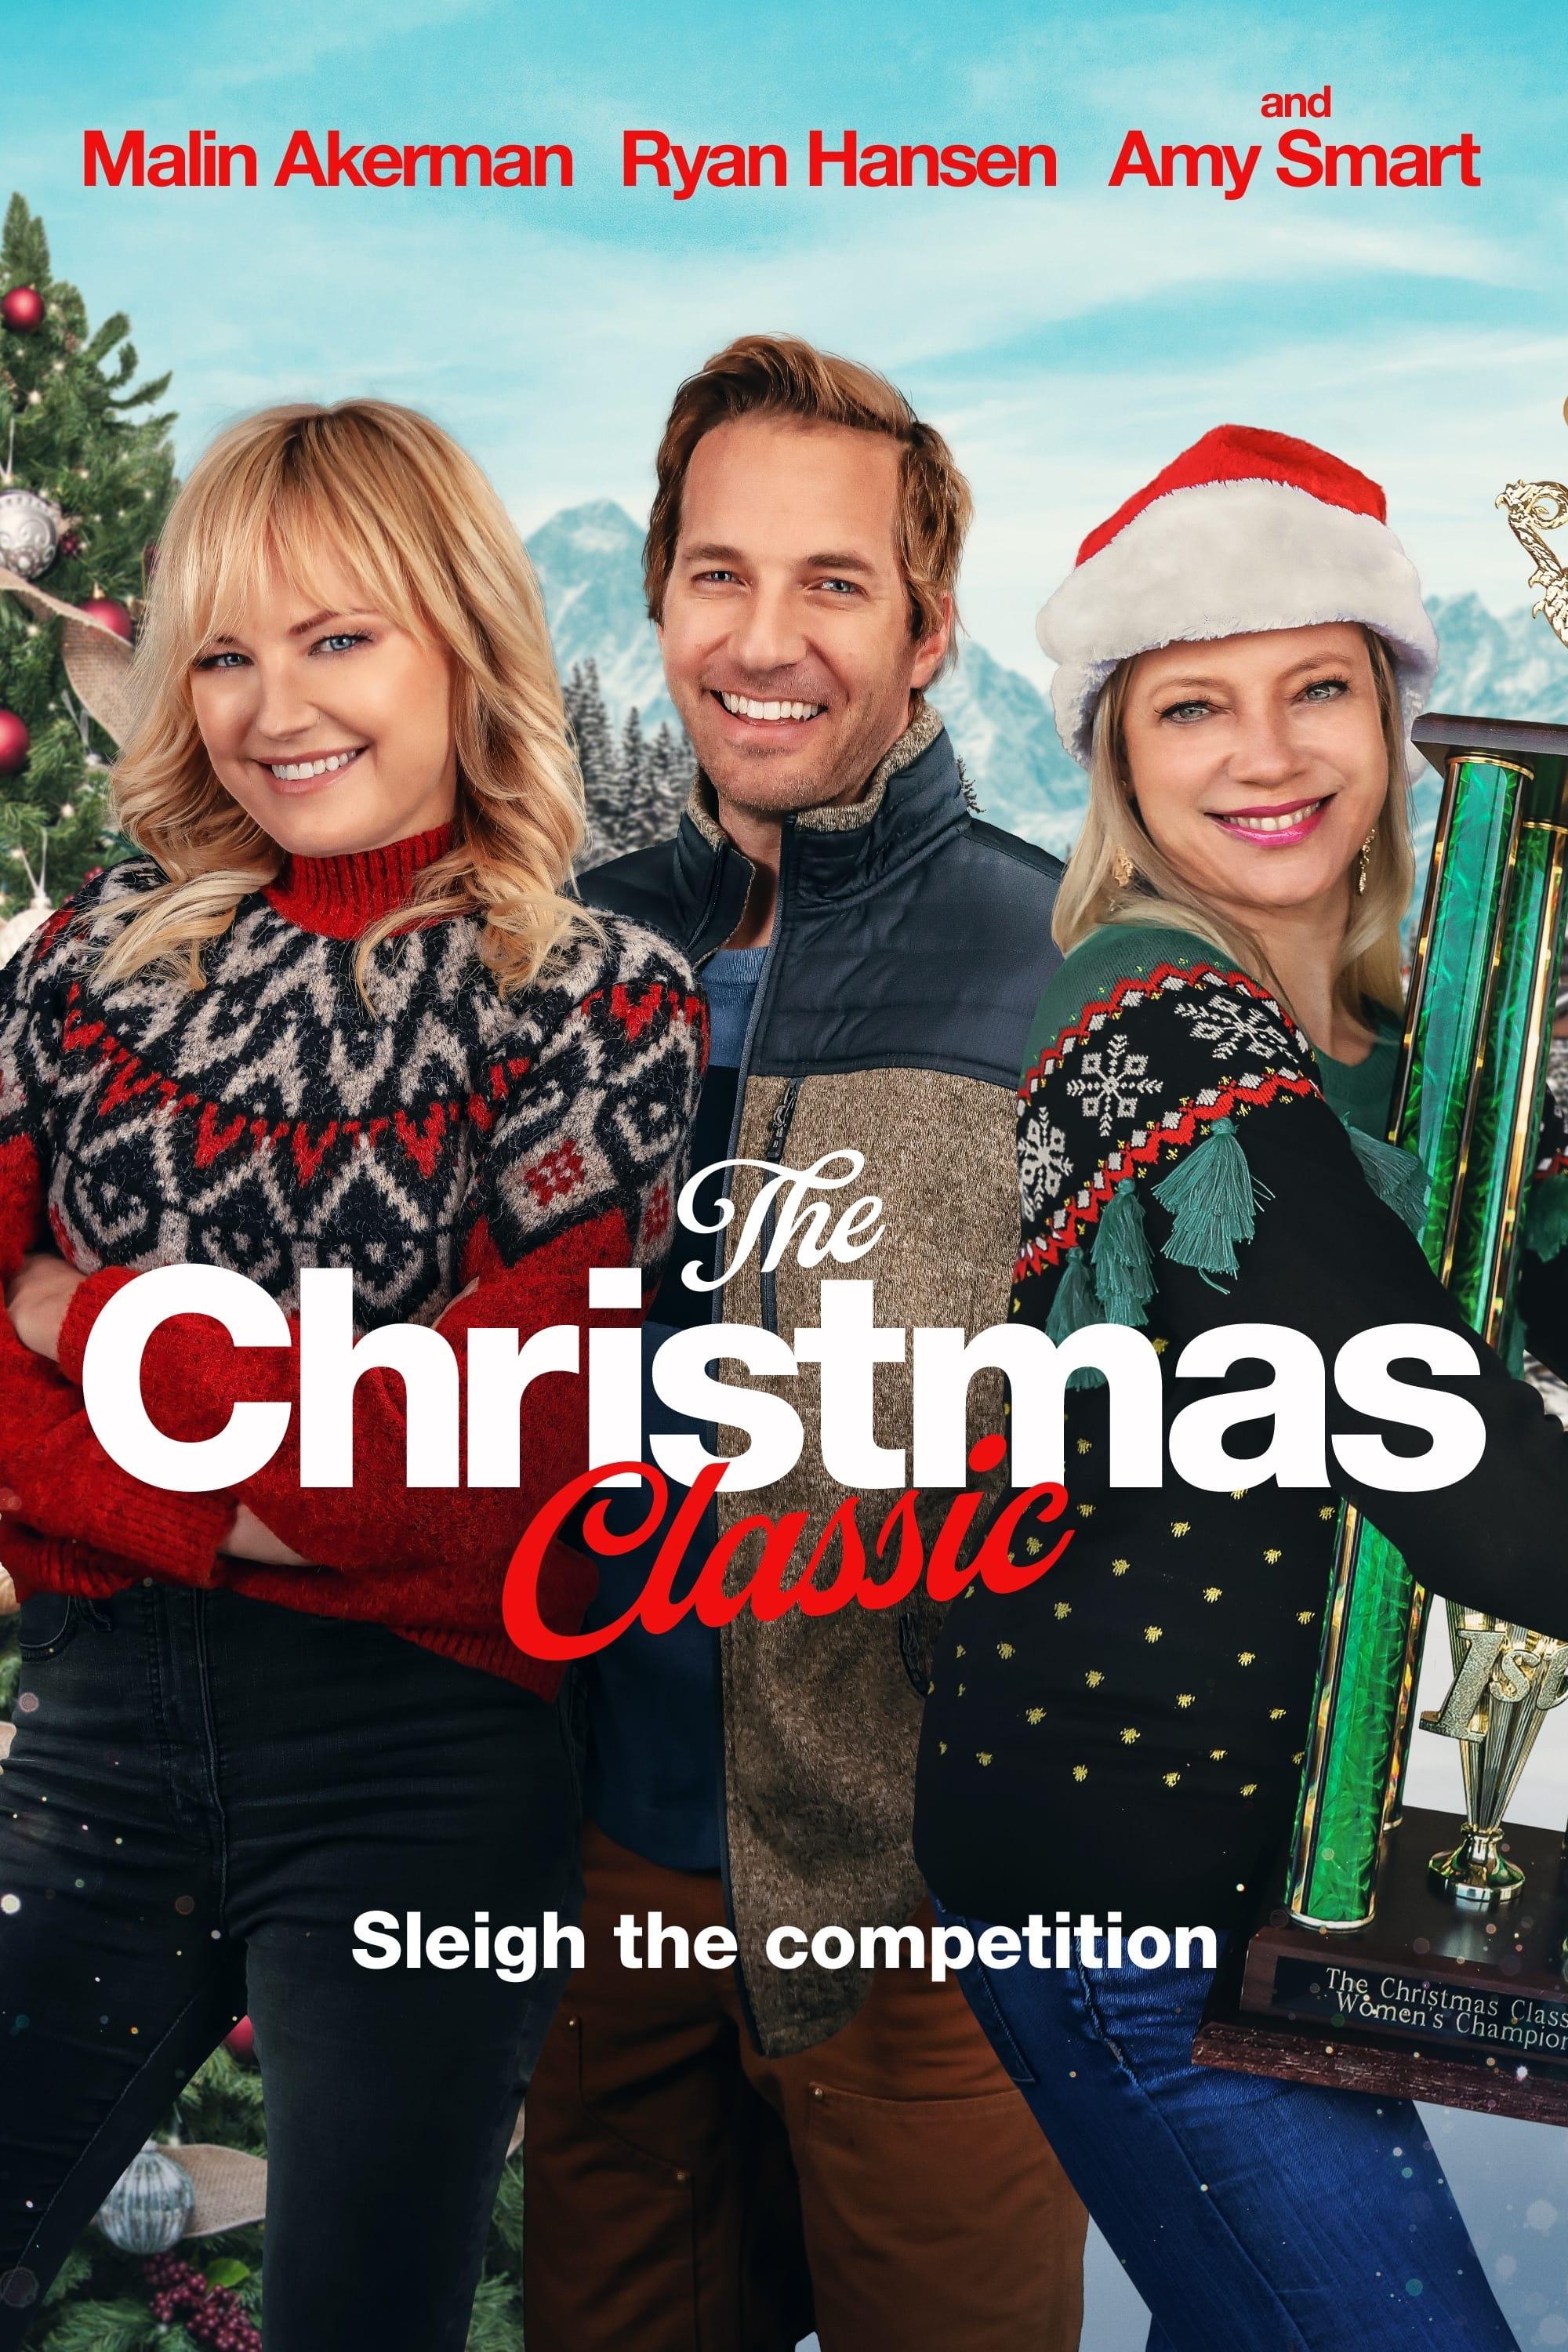 The Christmas Classic poster